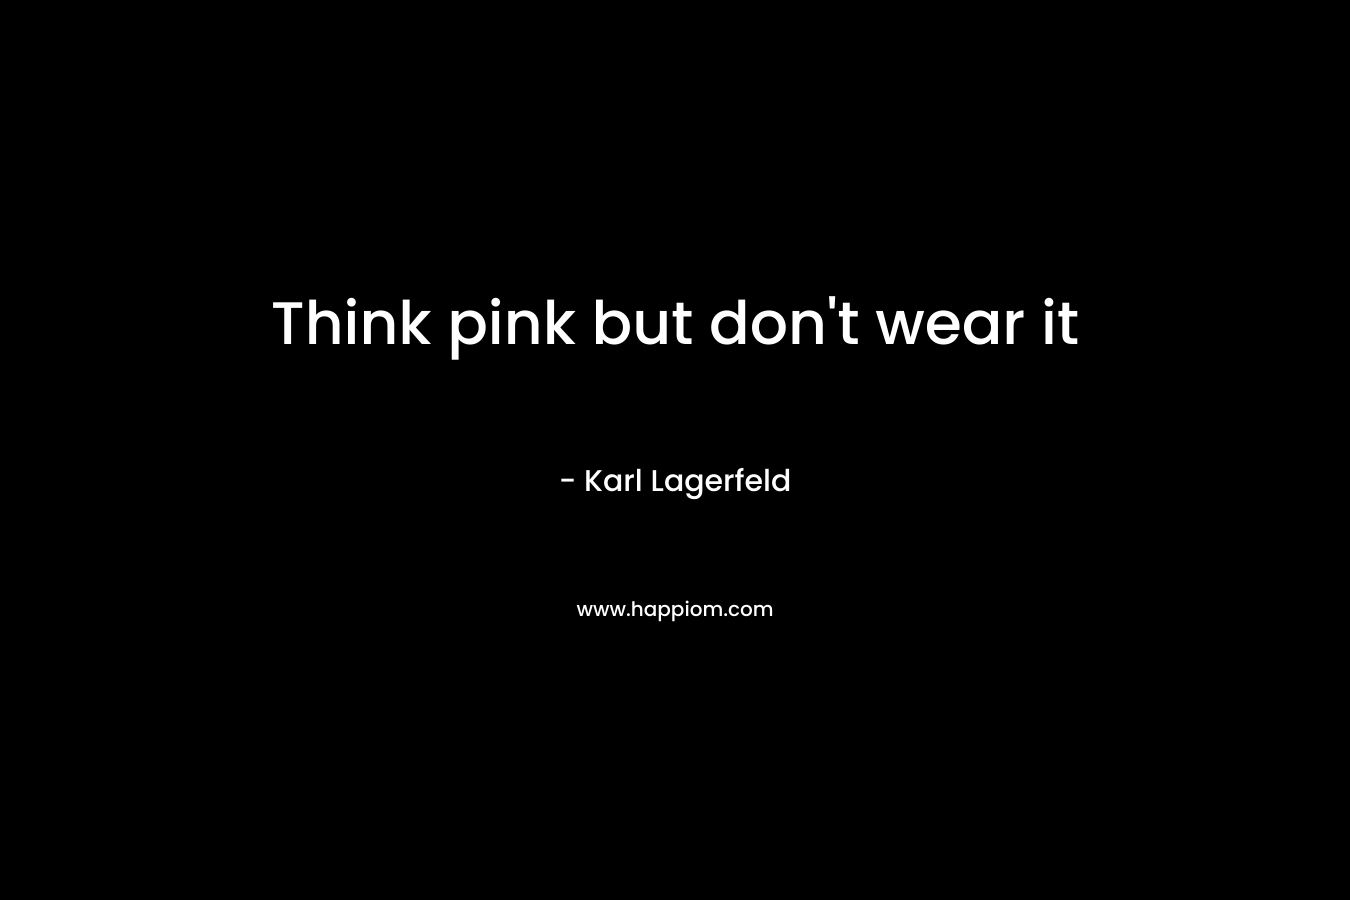 Think pink but don't wear it